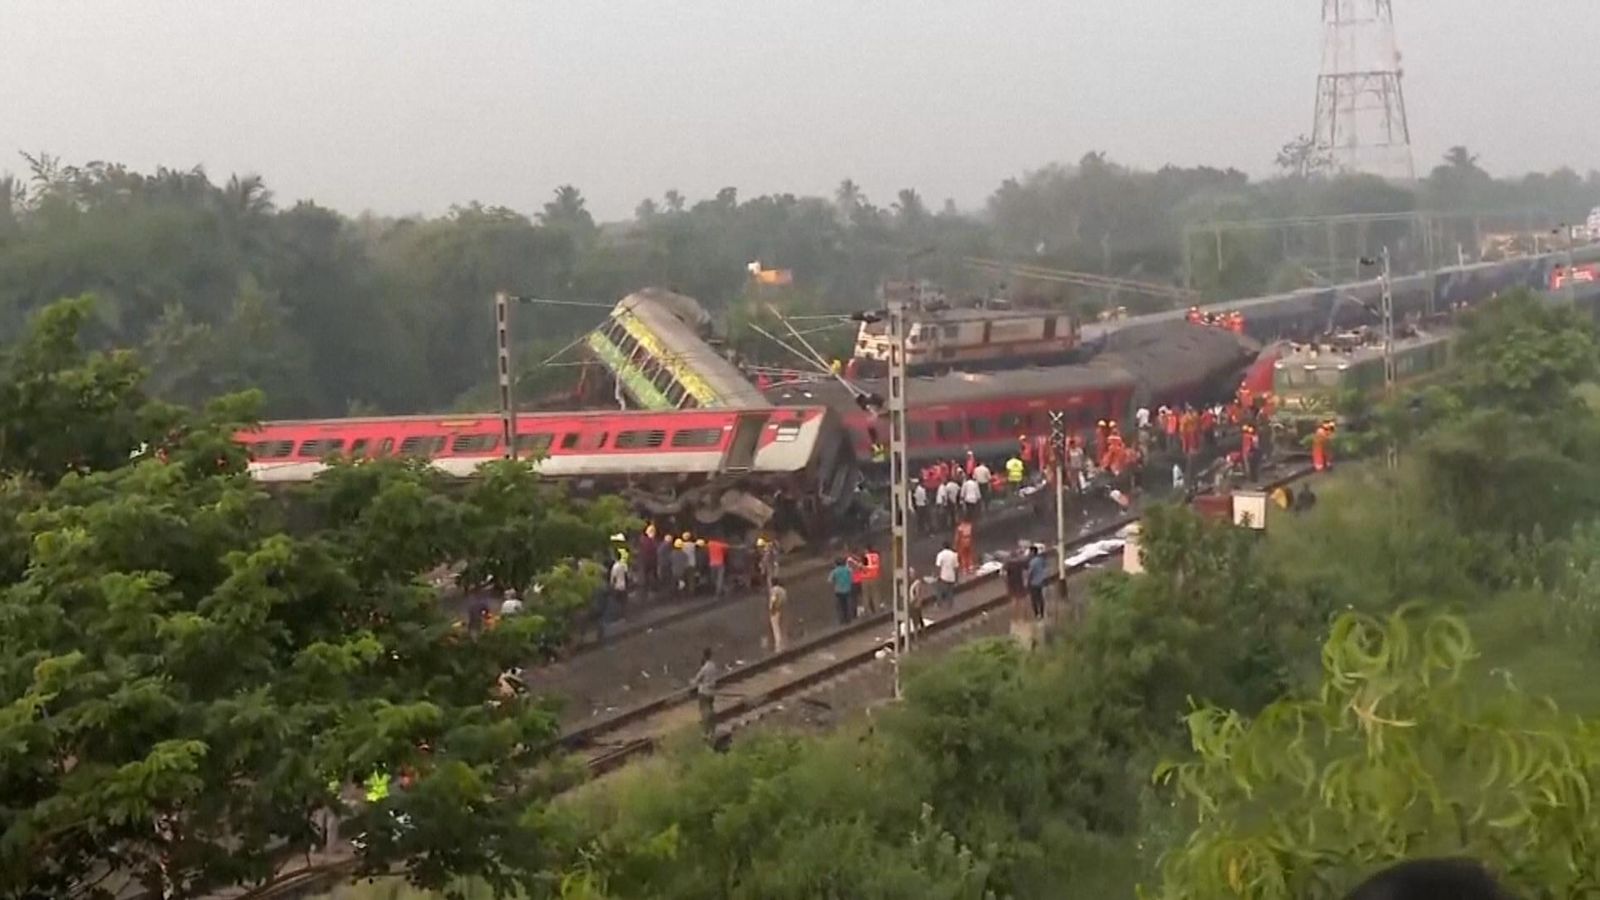 India train crash: How safe is the country's rail network? | World News ...